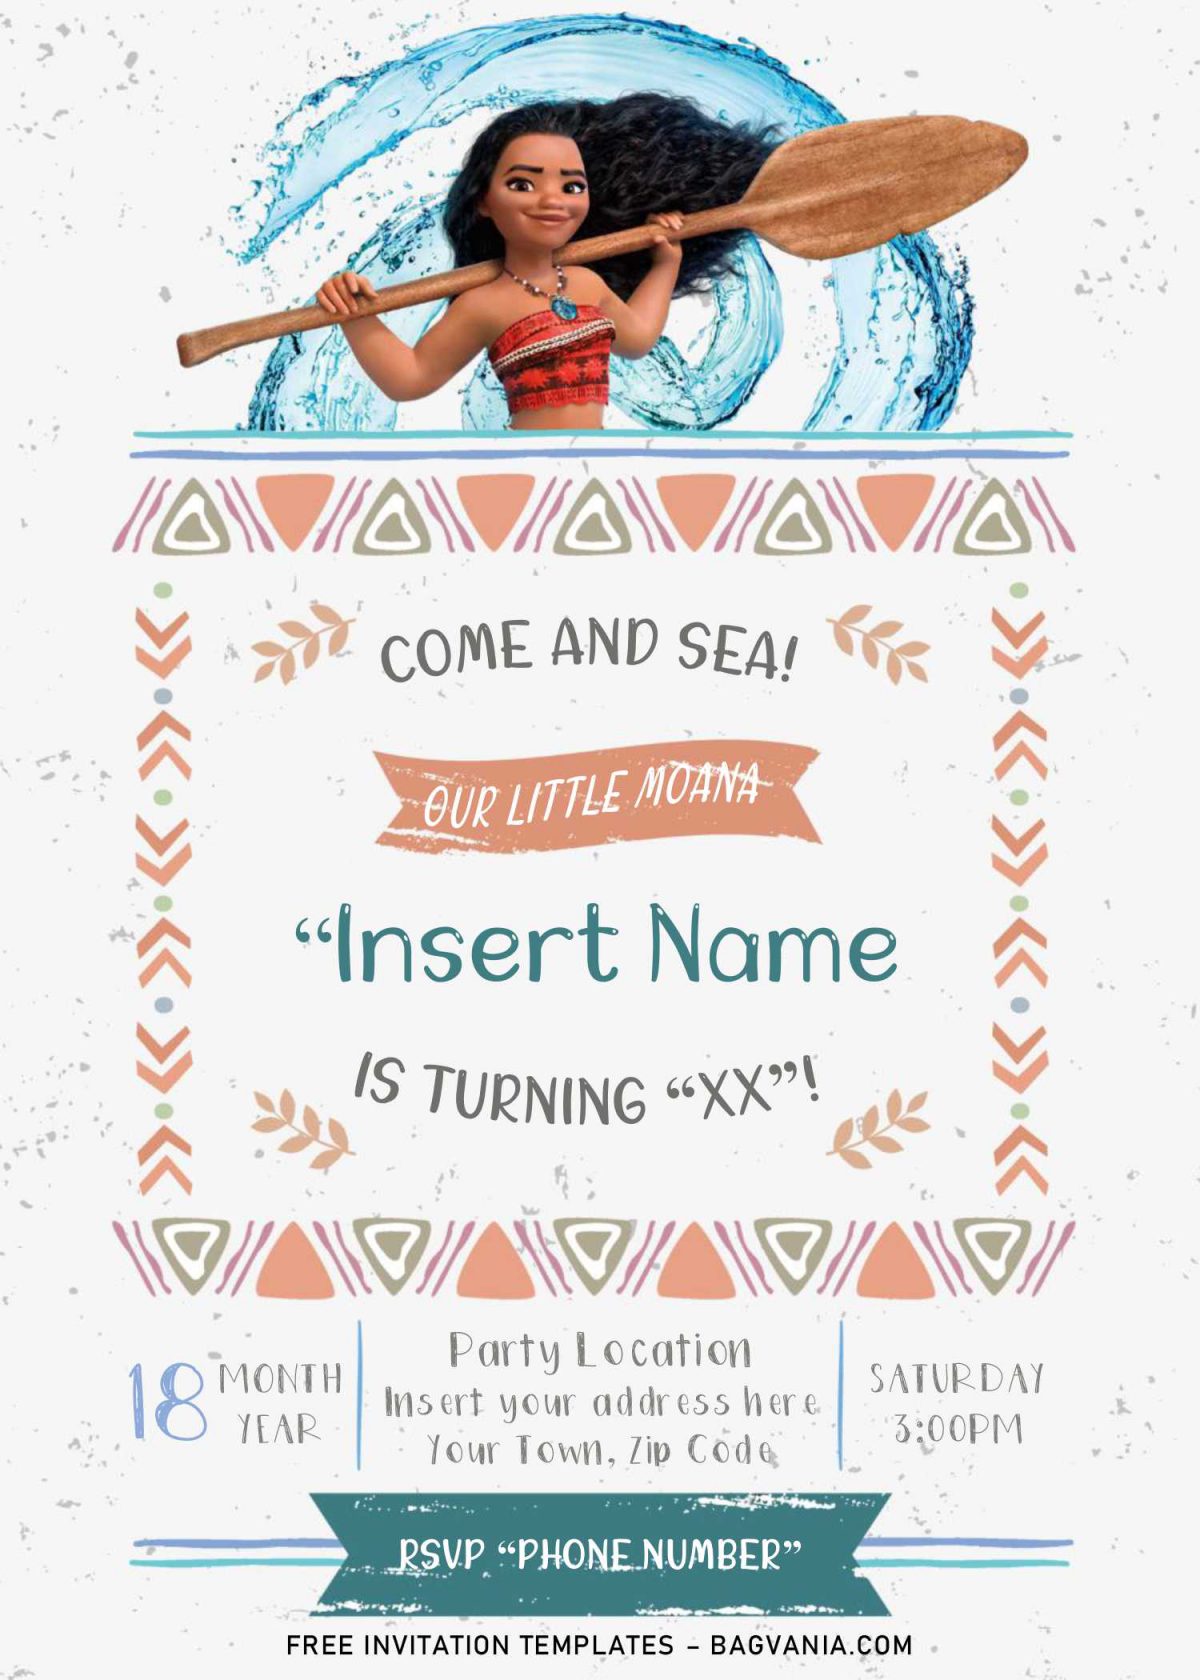 Free Moana Birthday Invitation Templates For Word and has Moana holding Paddle and Water Splash background